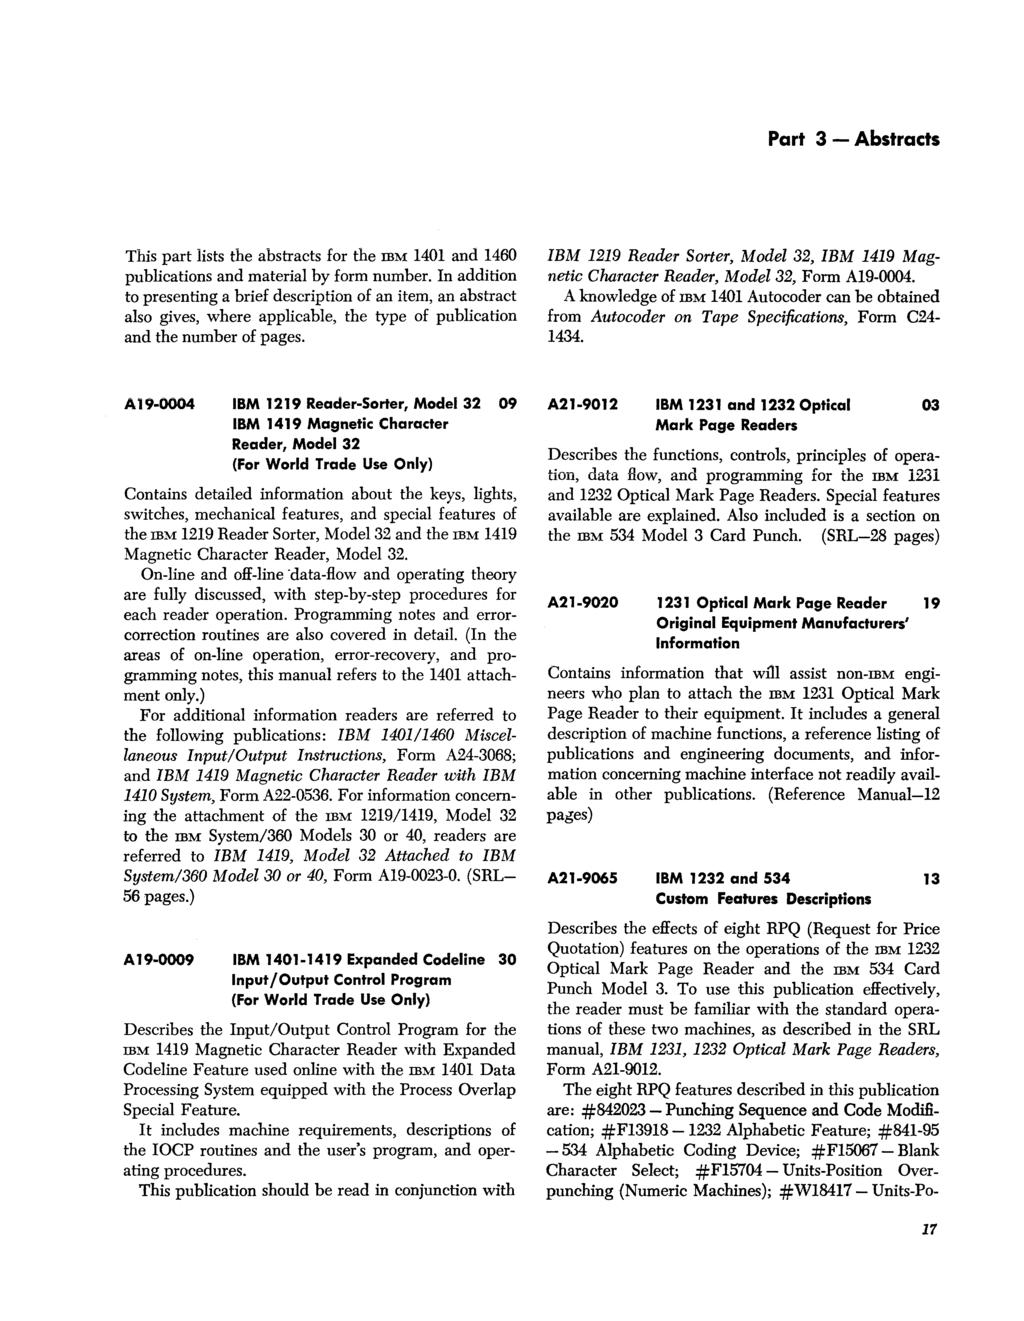 Part 3 - Abstracts This part lists the abstracts for the IBM 1401 and 1460 publications and material by form number.